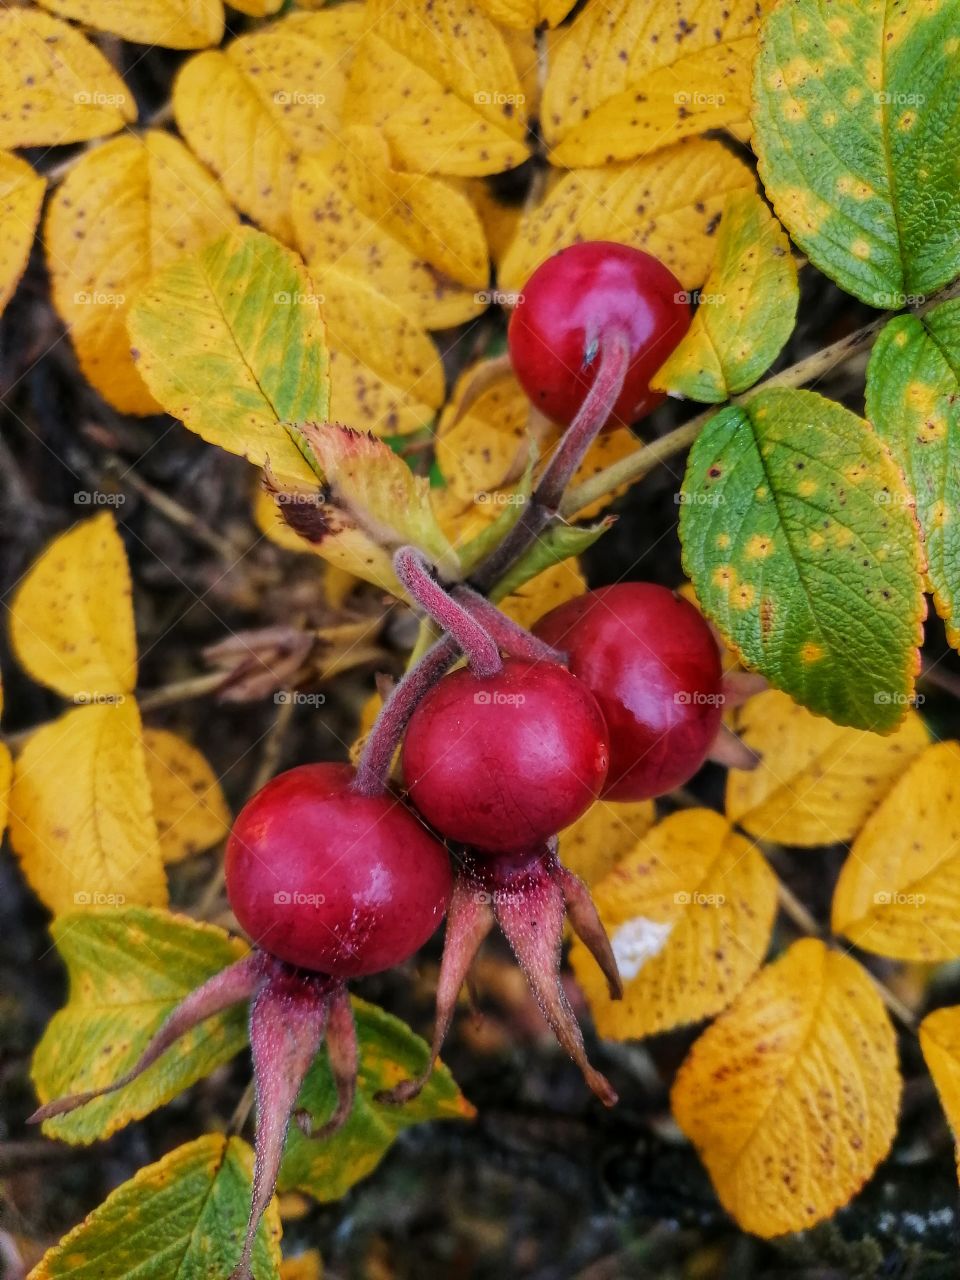 Rose bushes are in great fall colors now!